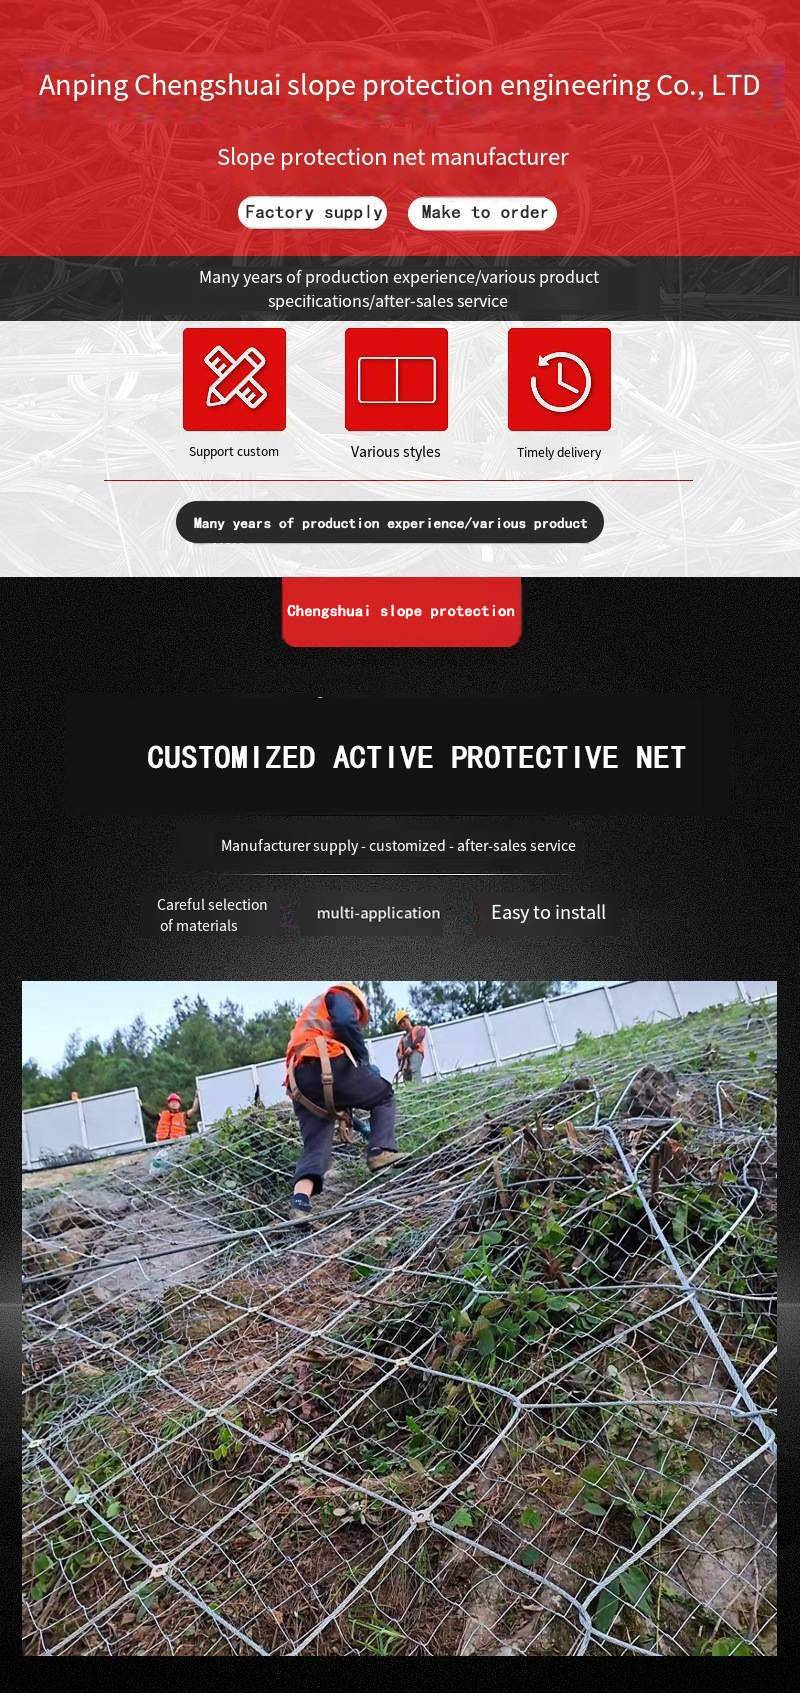 Active protective net CER1